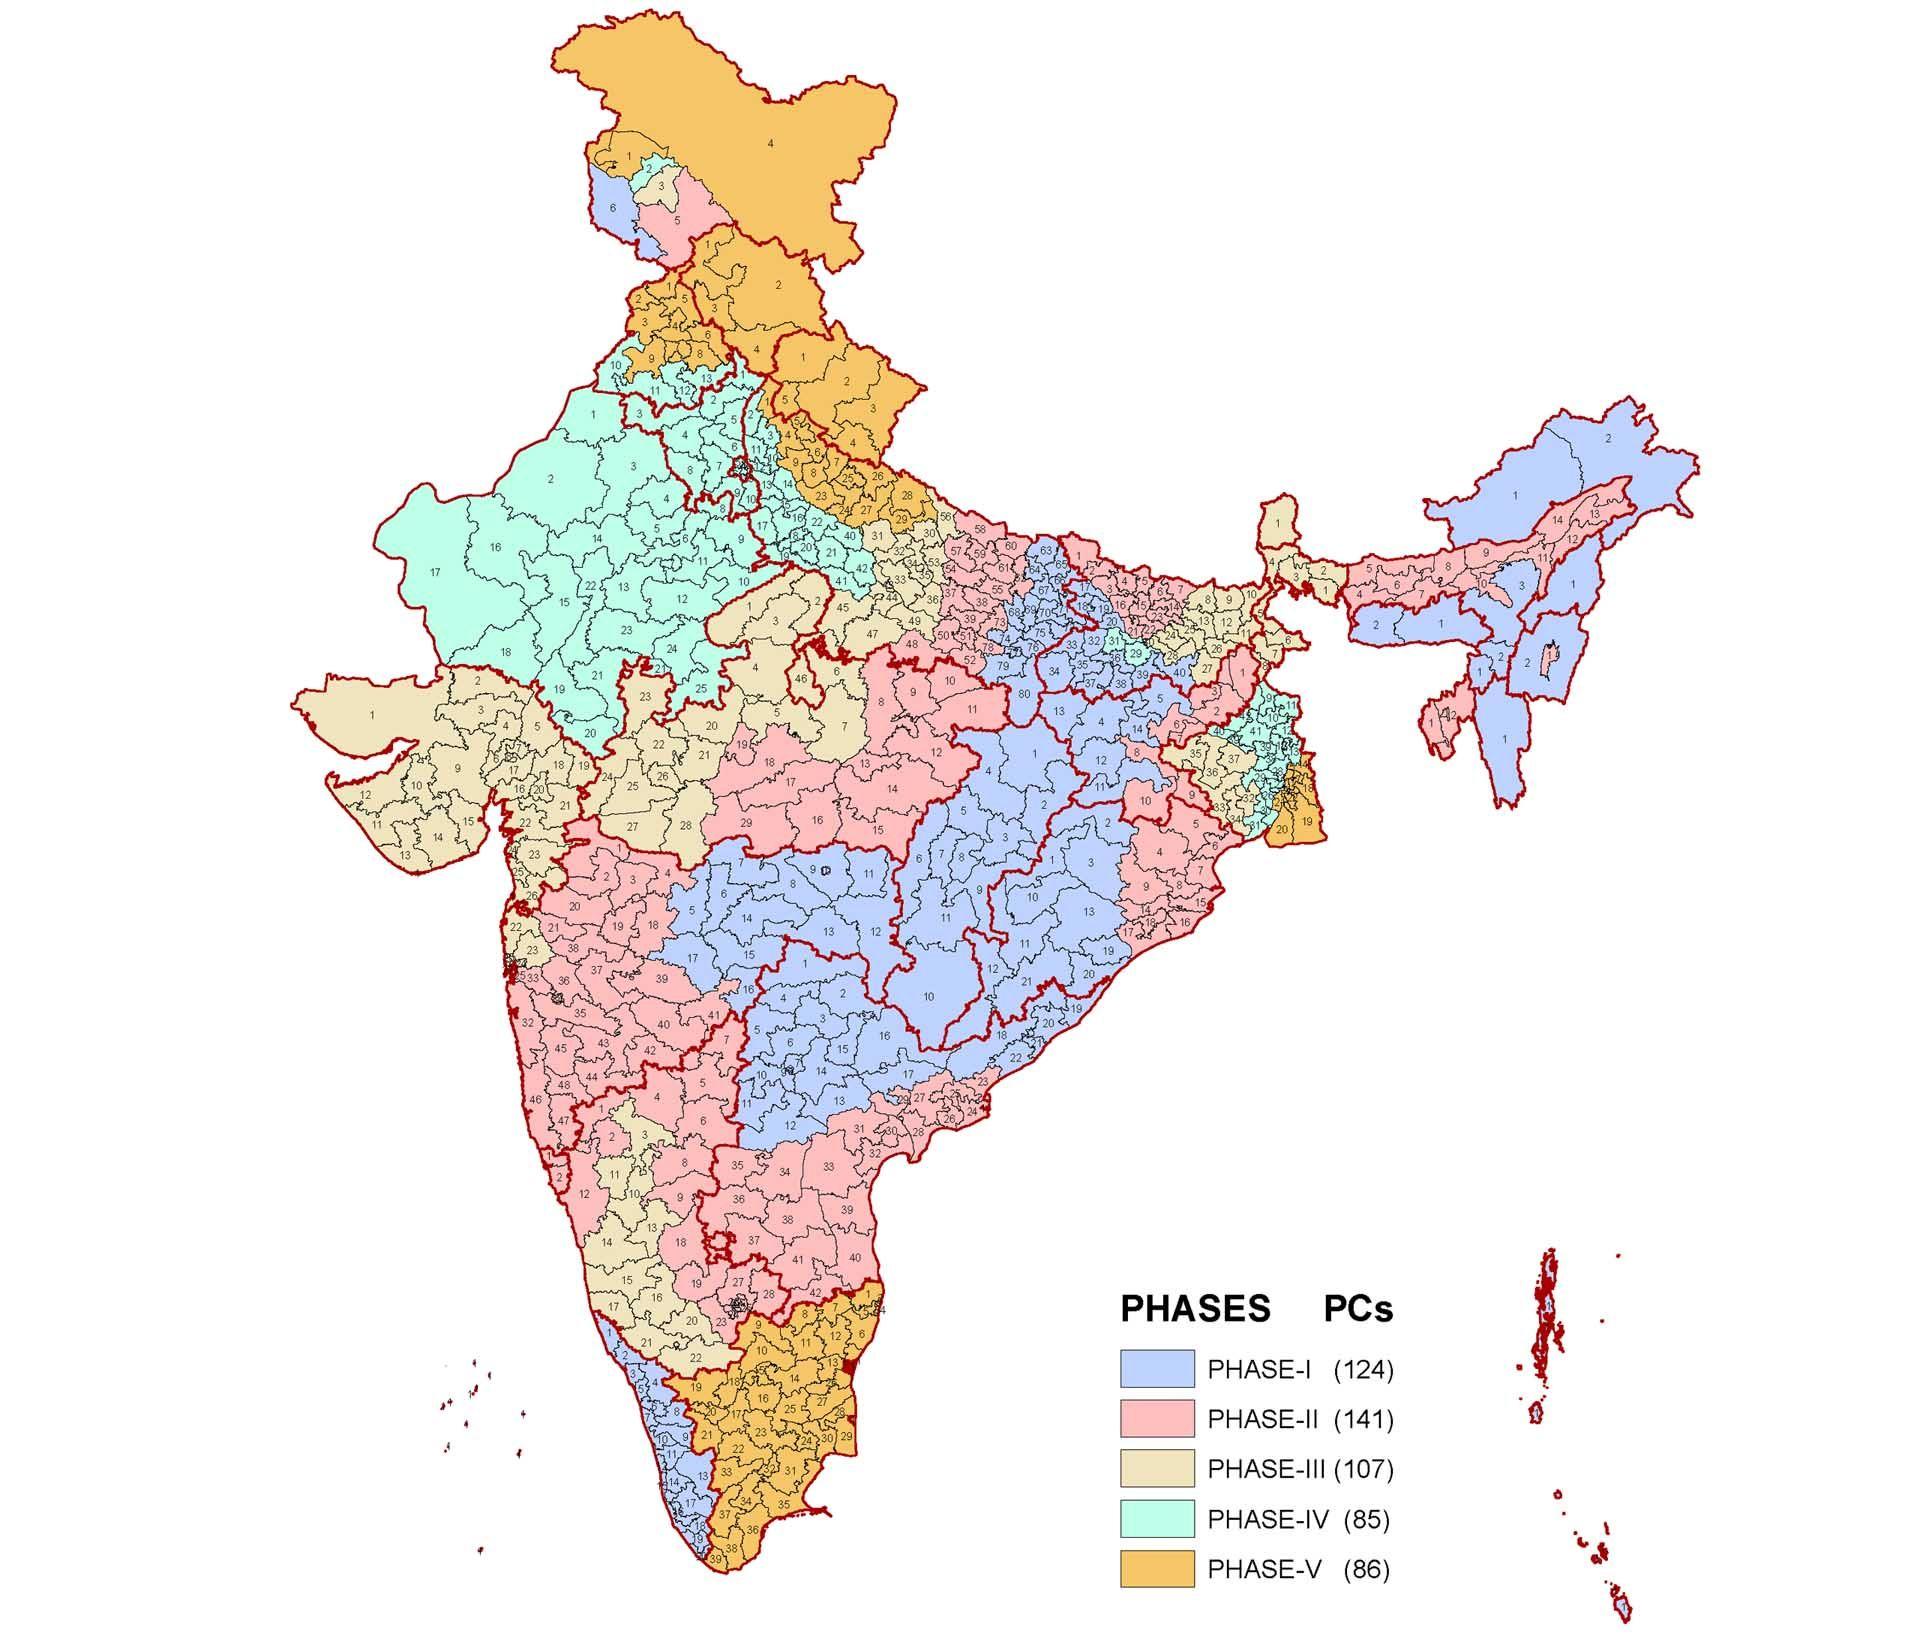 India Map Photo, Download India Map Wallpaper, Download Free. India map, Map wallpaper, Map picture